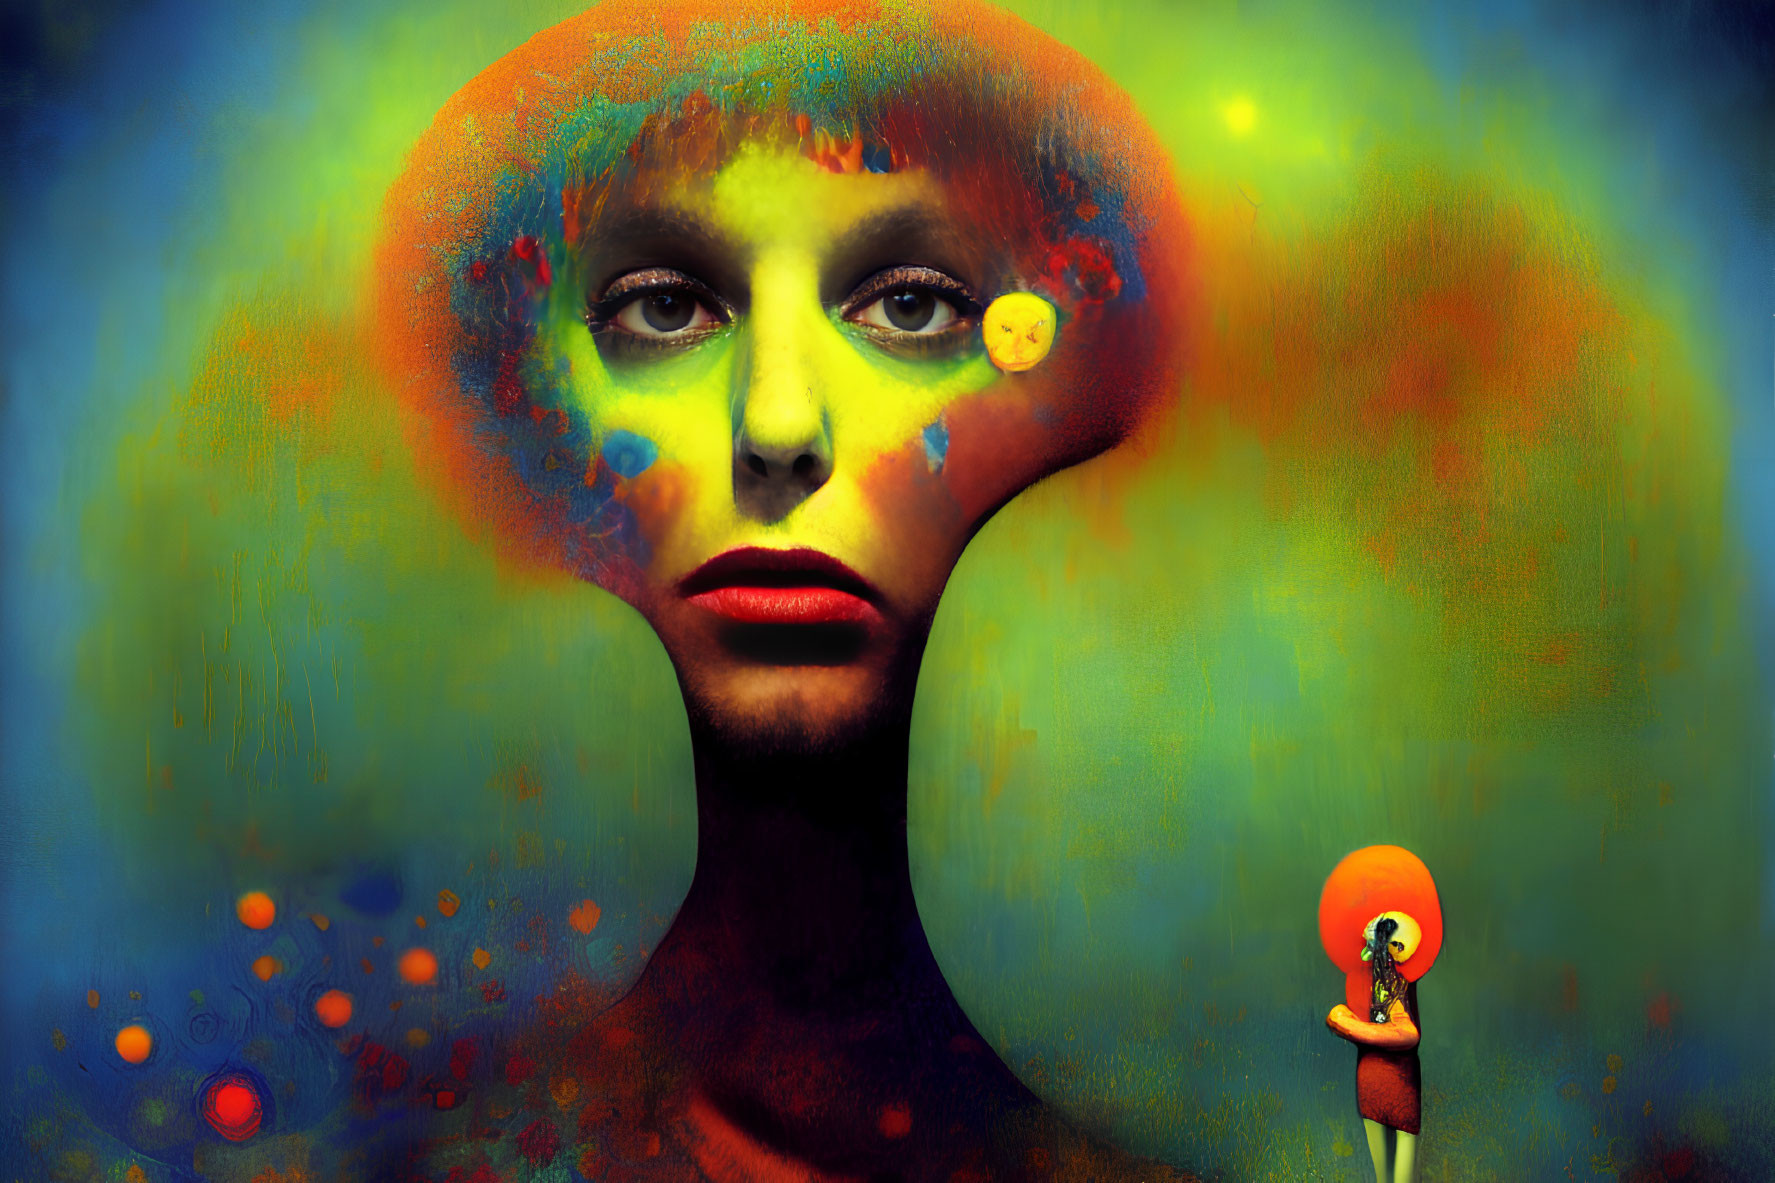 Surreal portrait with cosmic halo and smaller figure holding orb